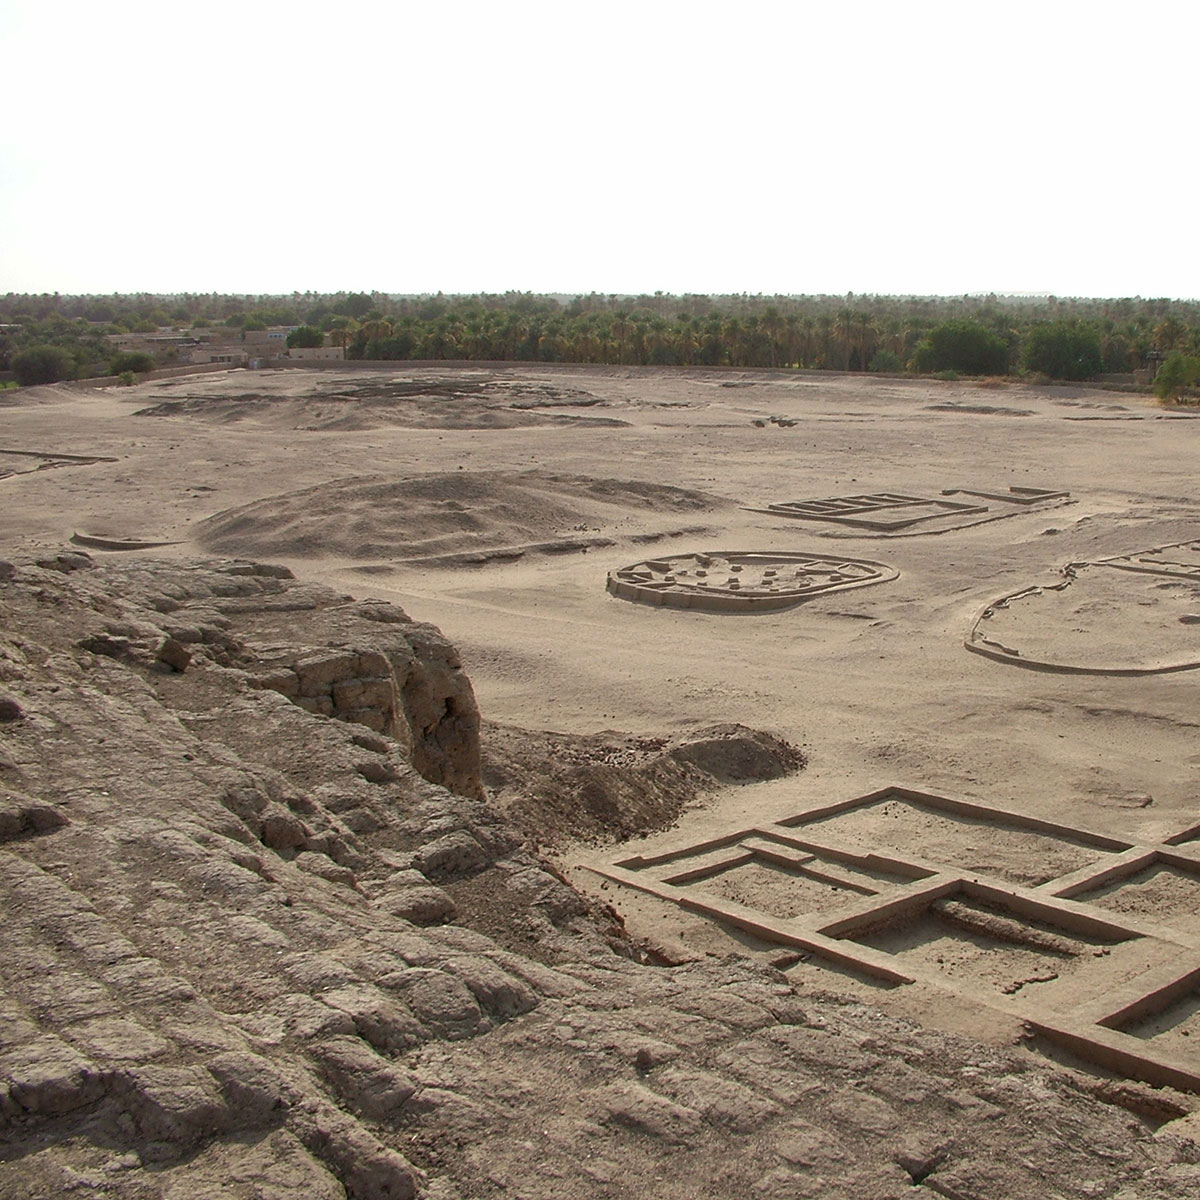 The Pattern of Urban Eco-political Structure Settlement in Ancient Kerma – Nubia